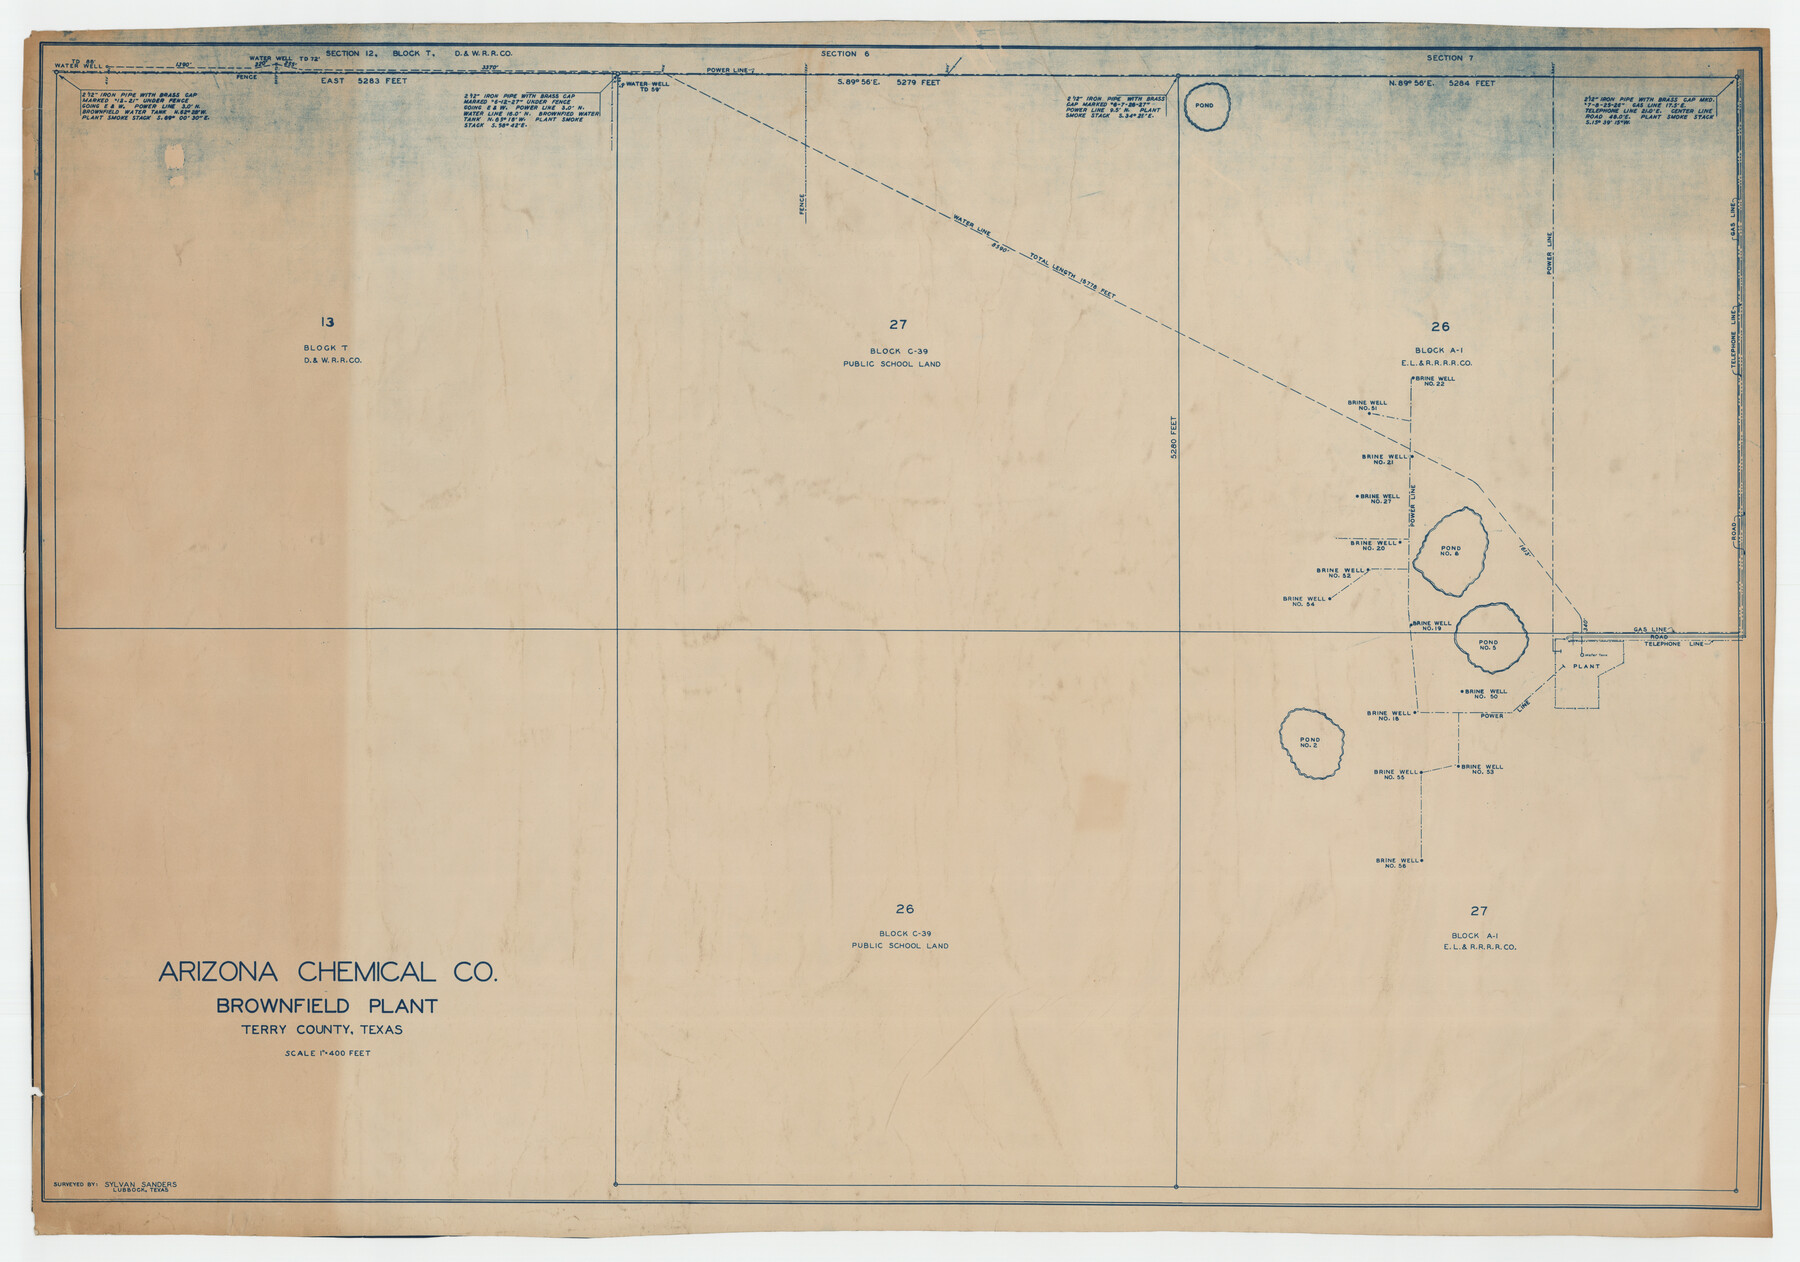 92892, Arizona Chemical Co. Brownfield Plant, Twichell Survey Records